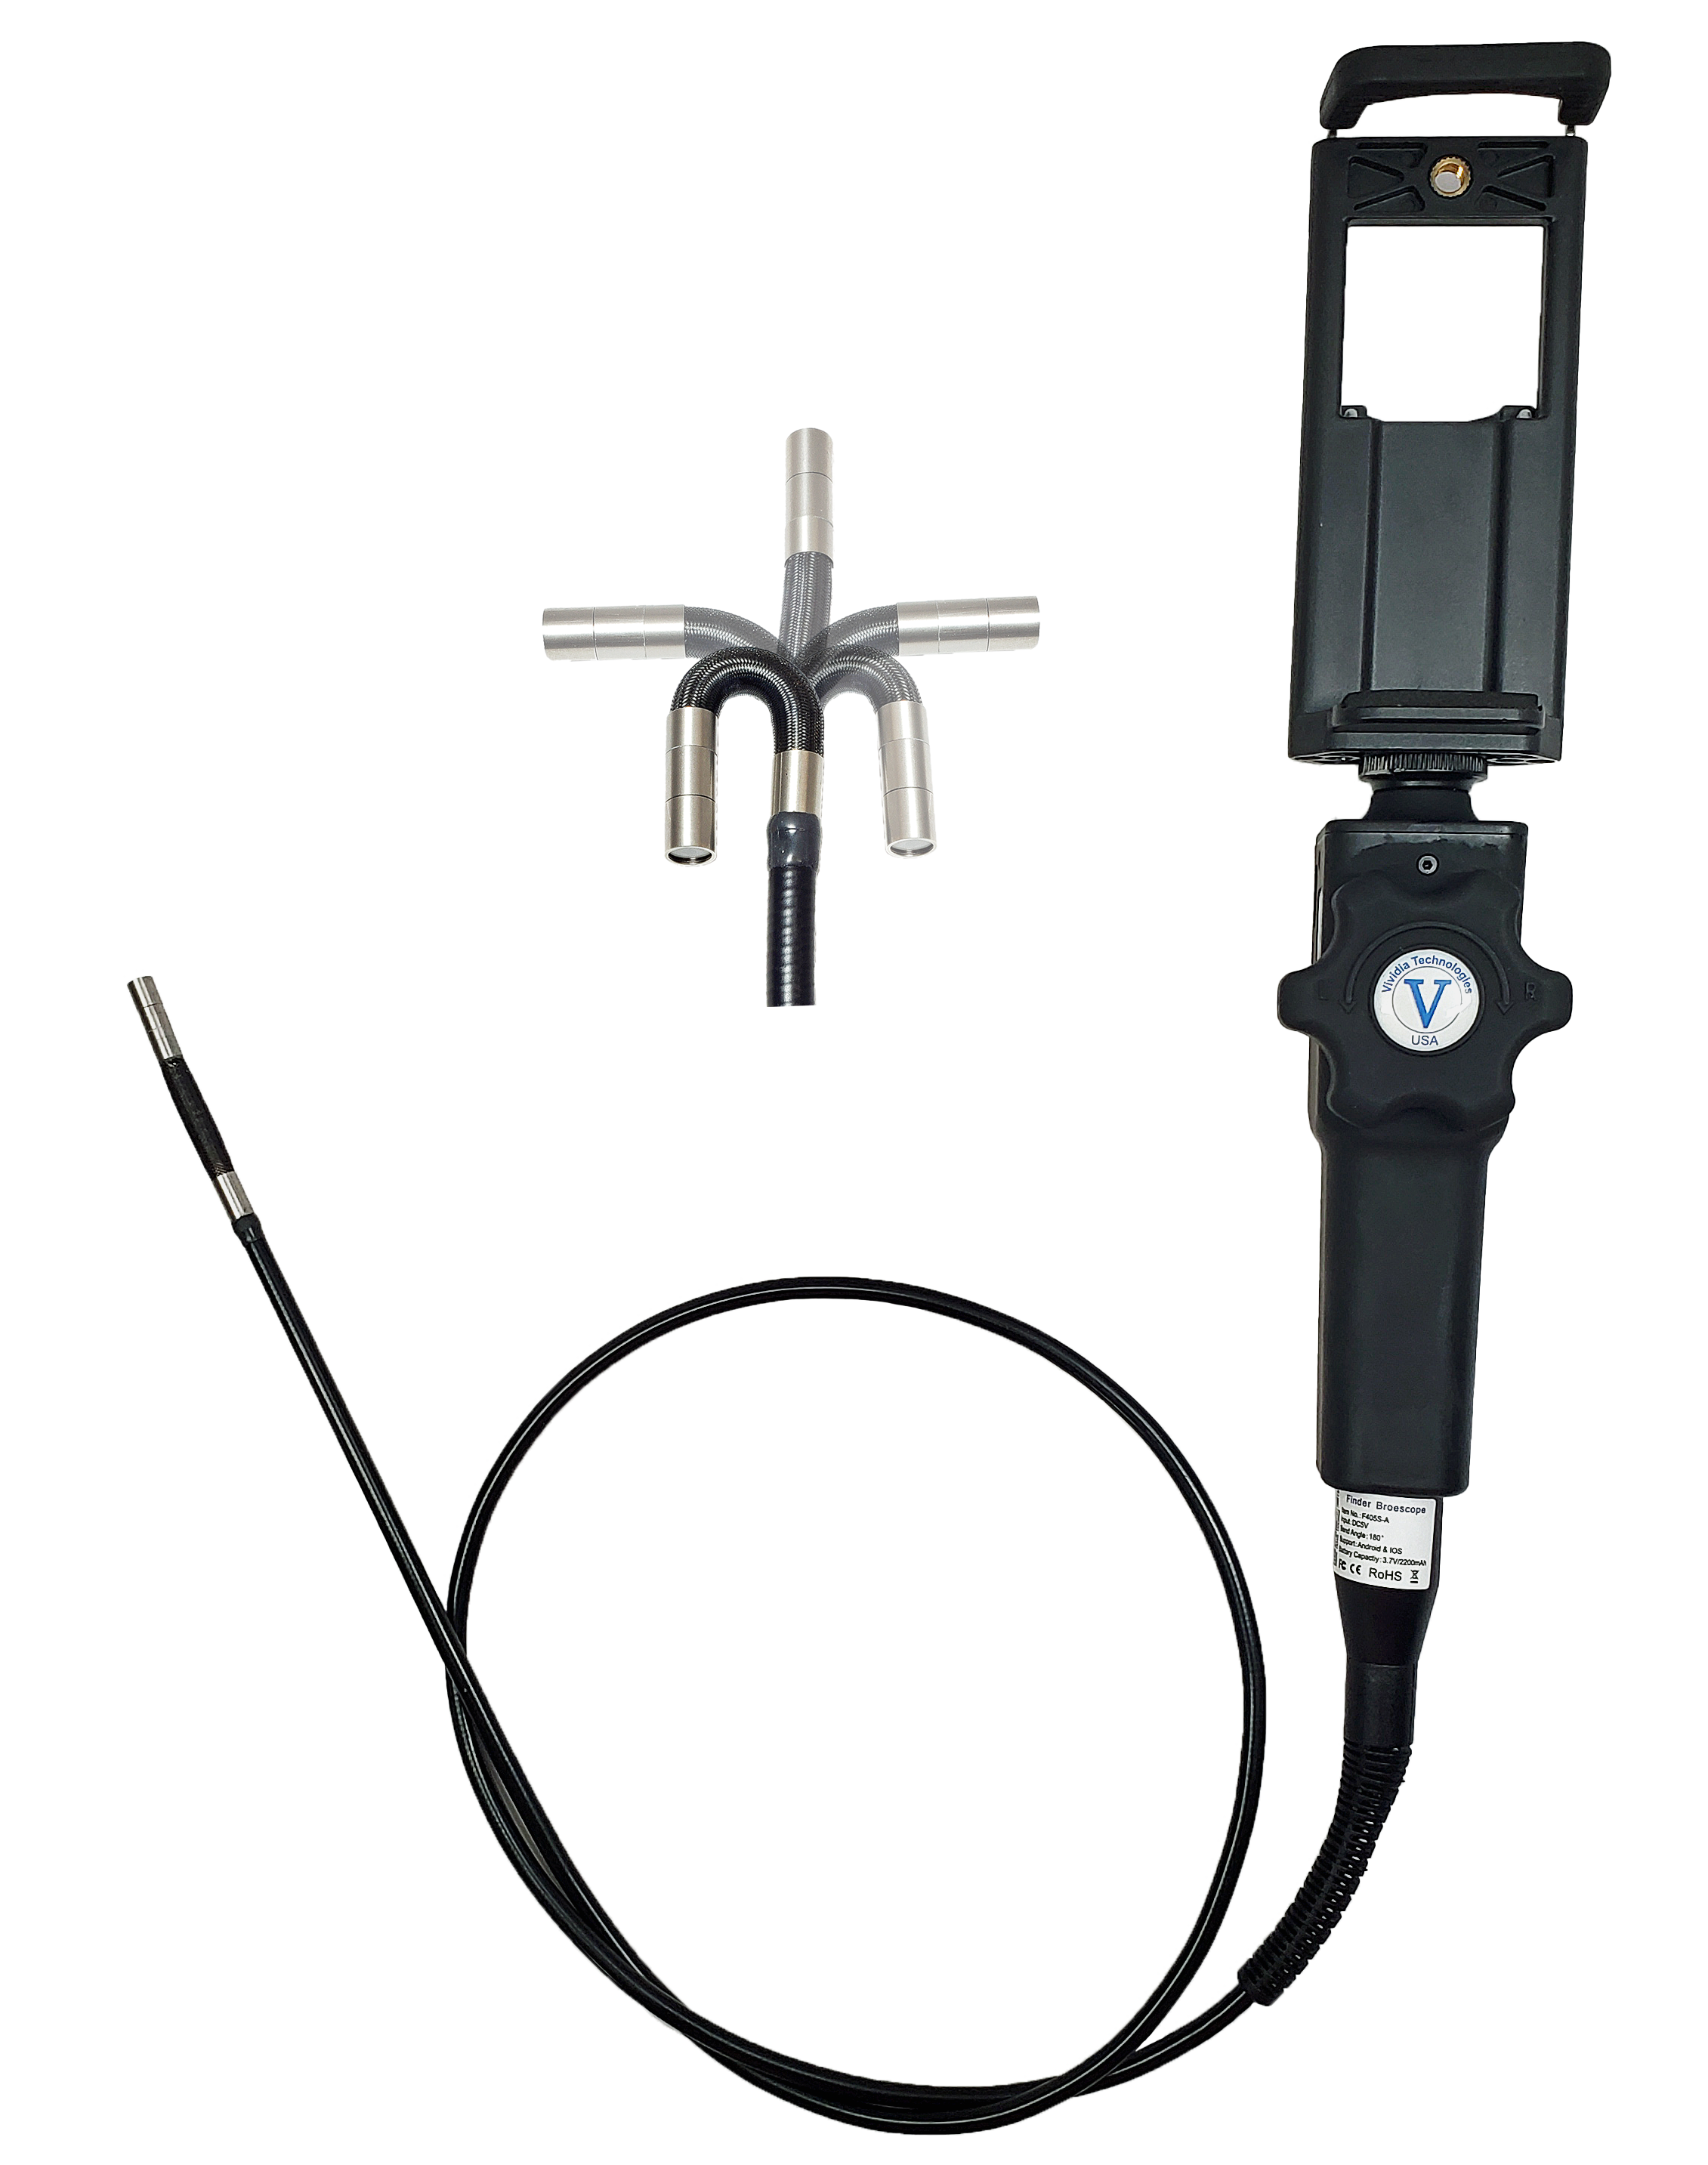 Aardvark Inspection Camera Attachment for iPhone and Android